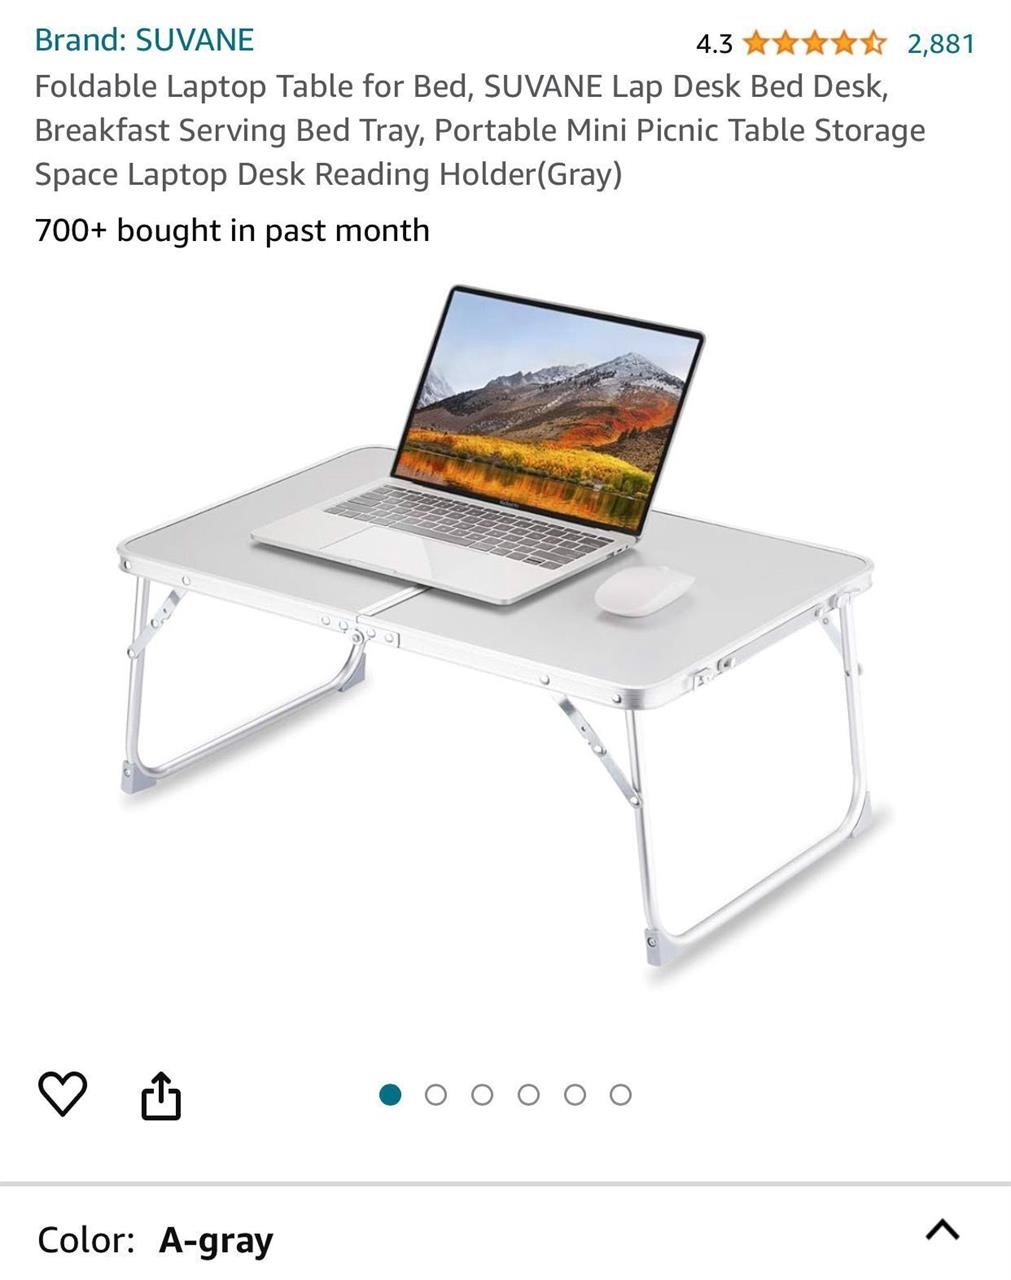 Foldable Laptop Table for Bed